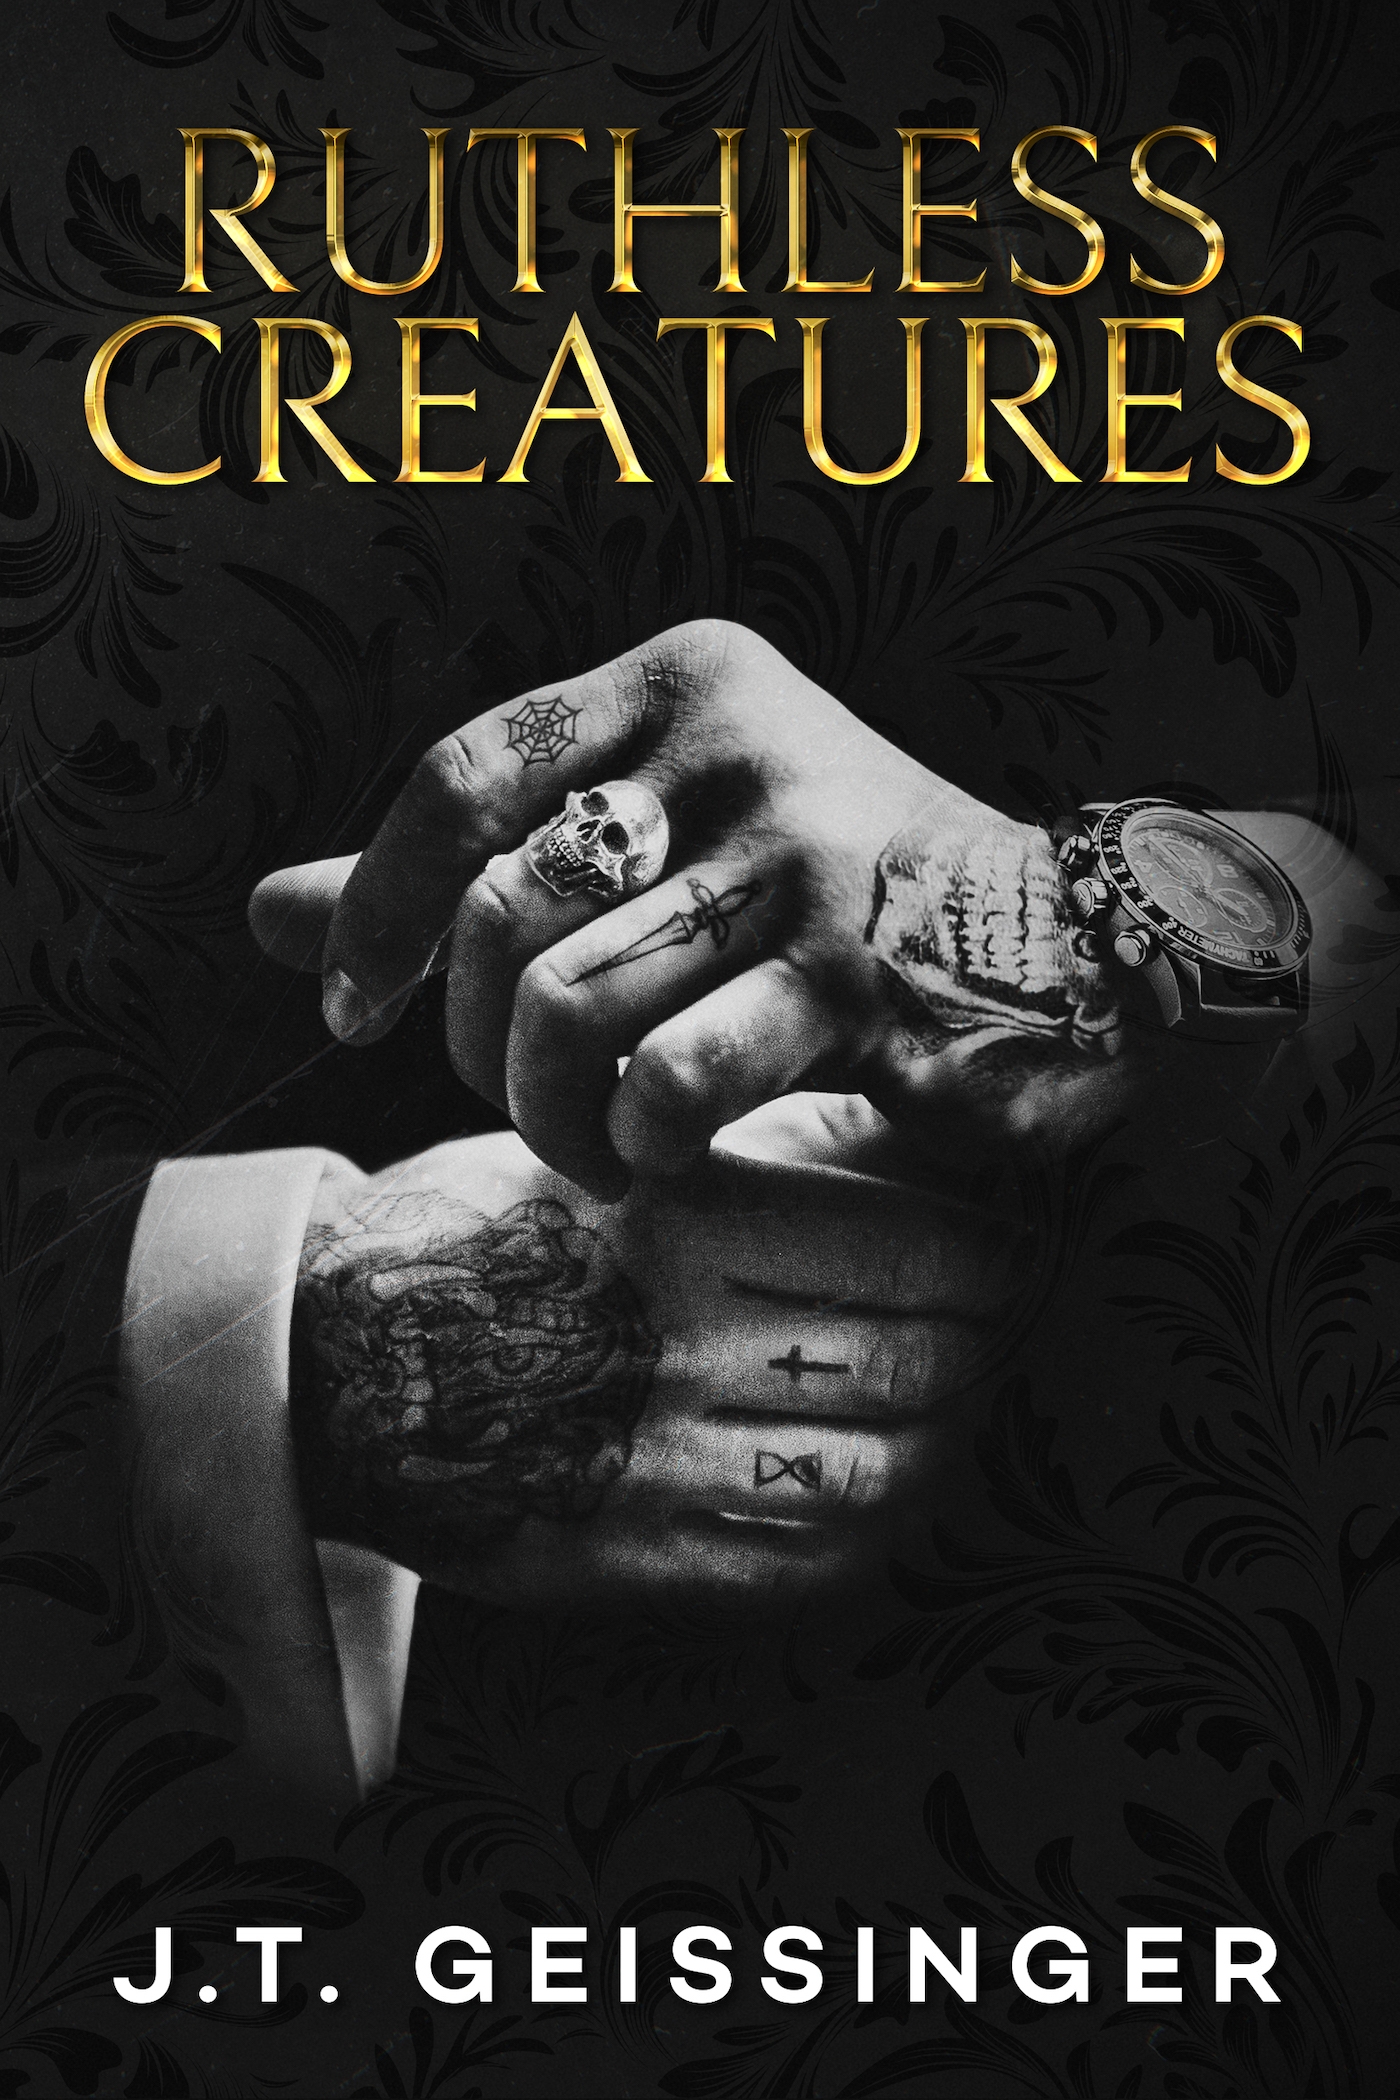 Ruthless Creatures : Queens and Monsters Book 1 by J.T. Geissinger